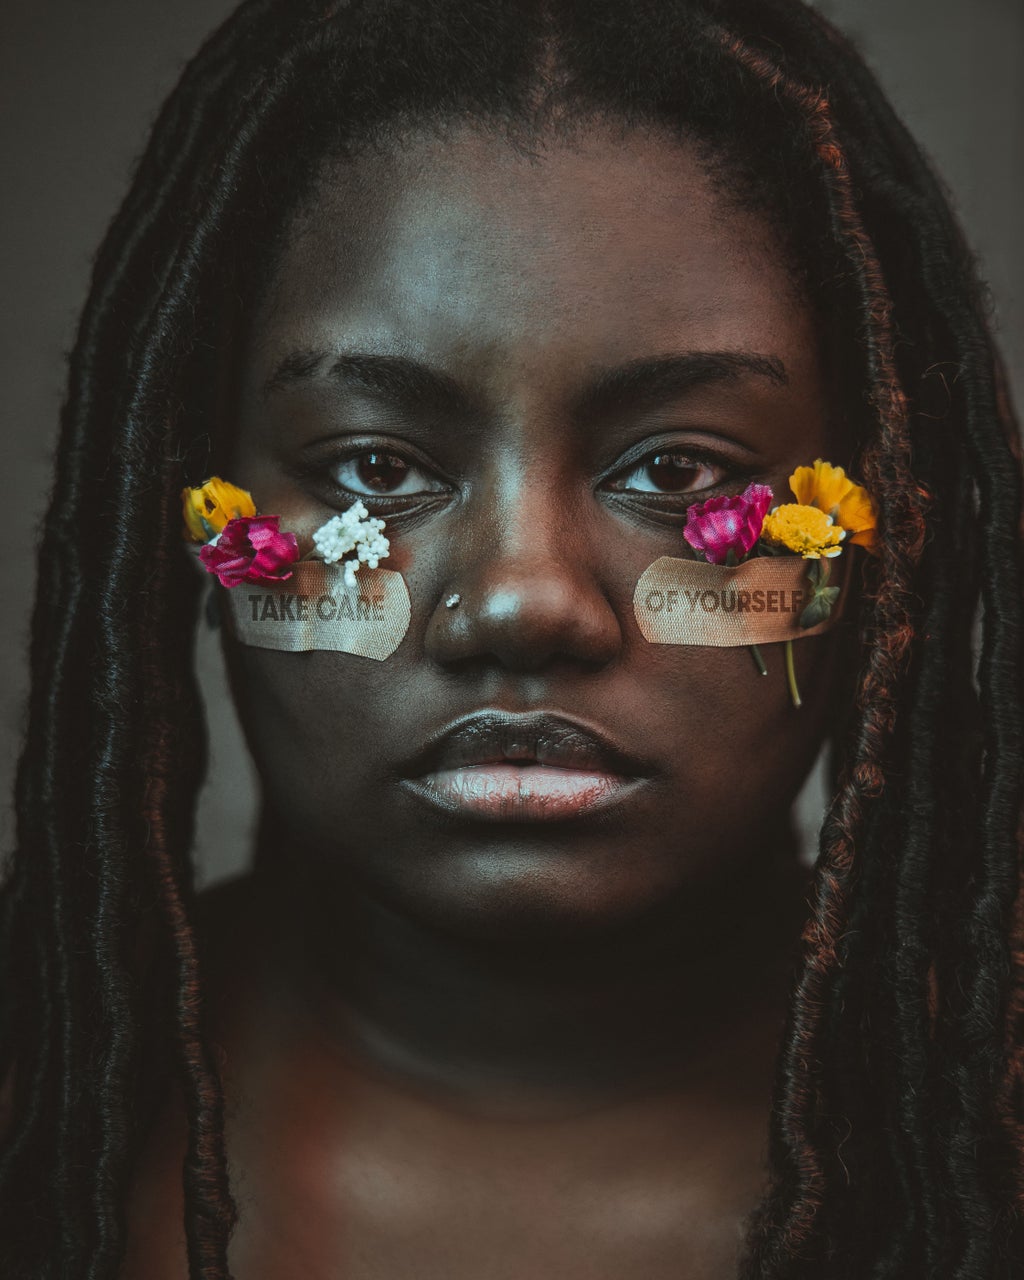 Black woman with yellow and pink flowers taped to her face with  \'Take care of yourself\' written on the tape